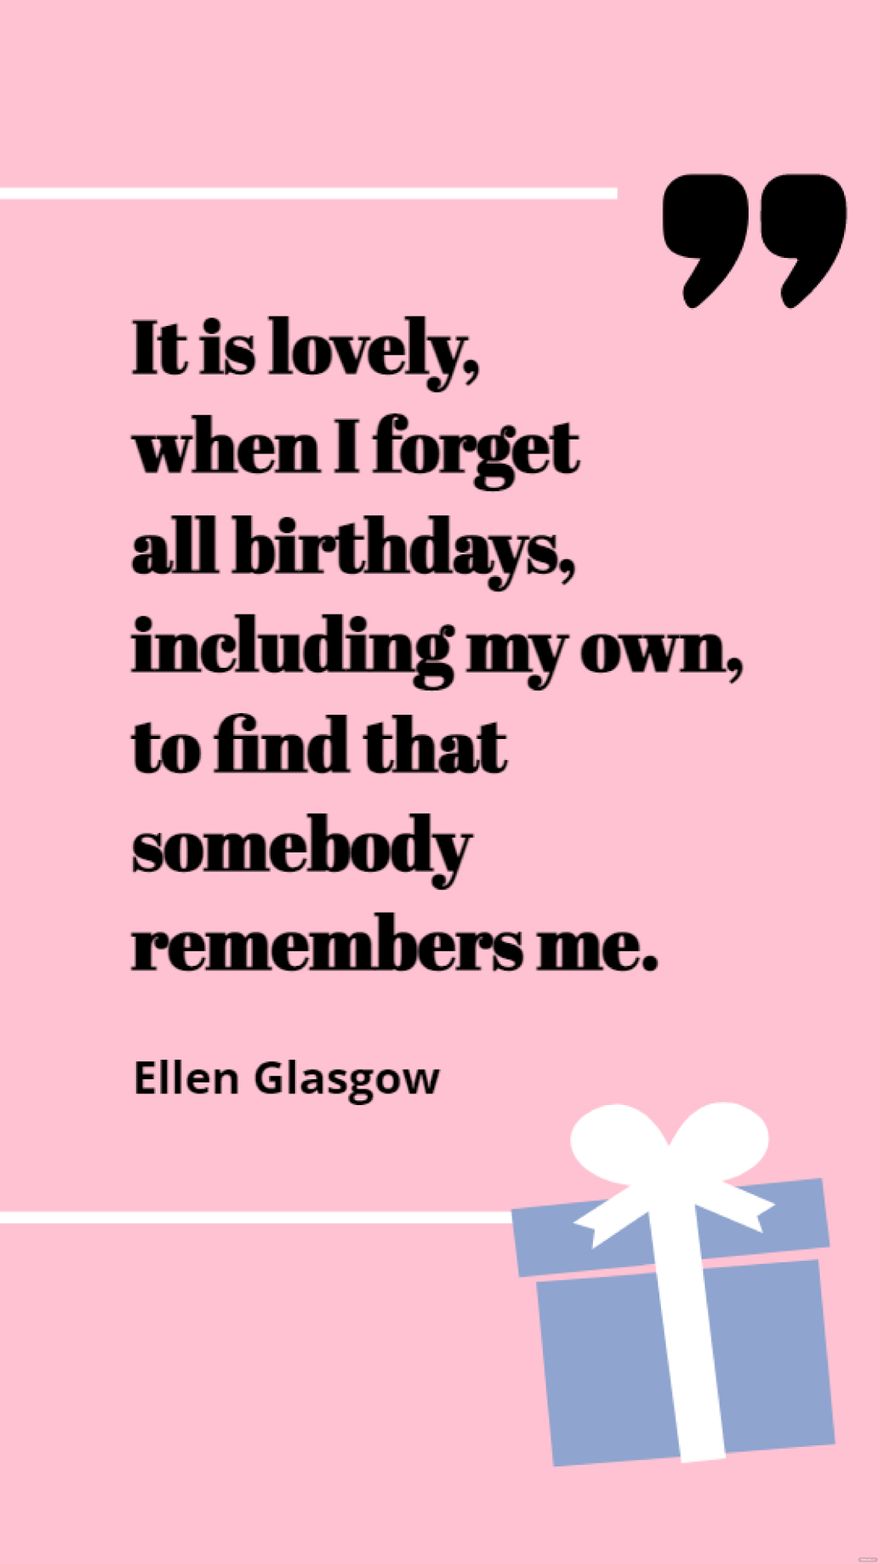 Ellen Glasgow - It is lovely, when I forget all birthdays, including my own, to find that somebody remembers me.